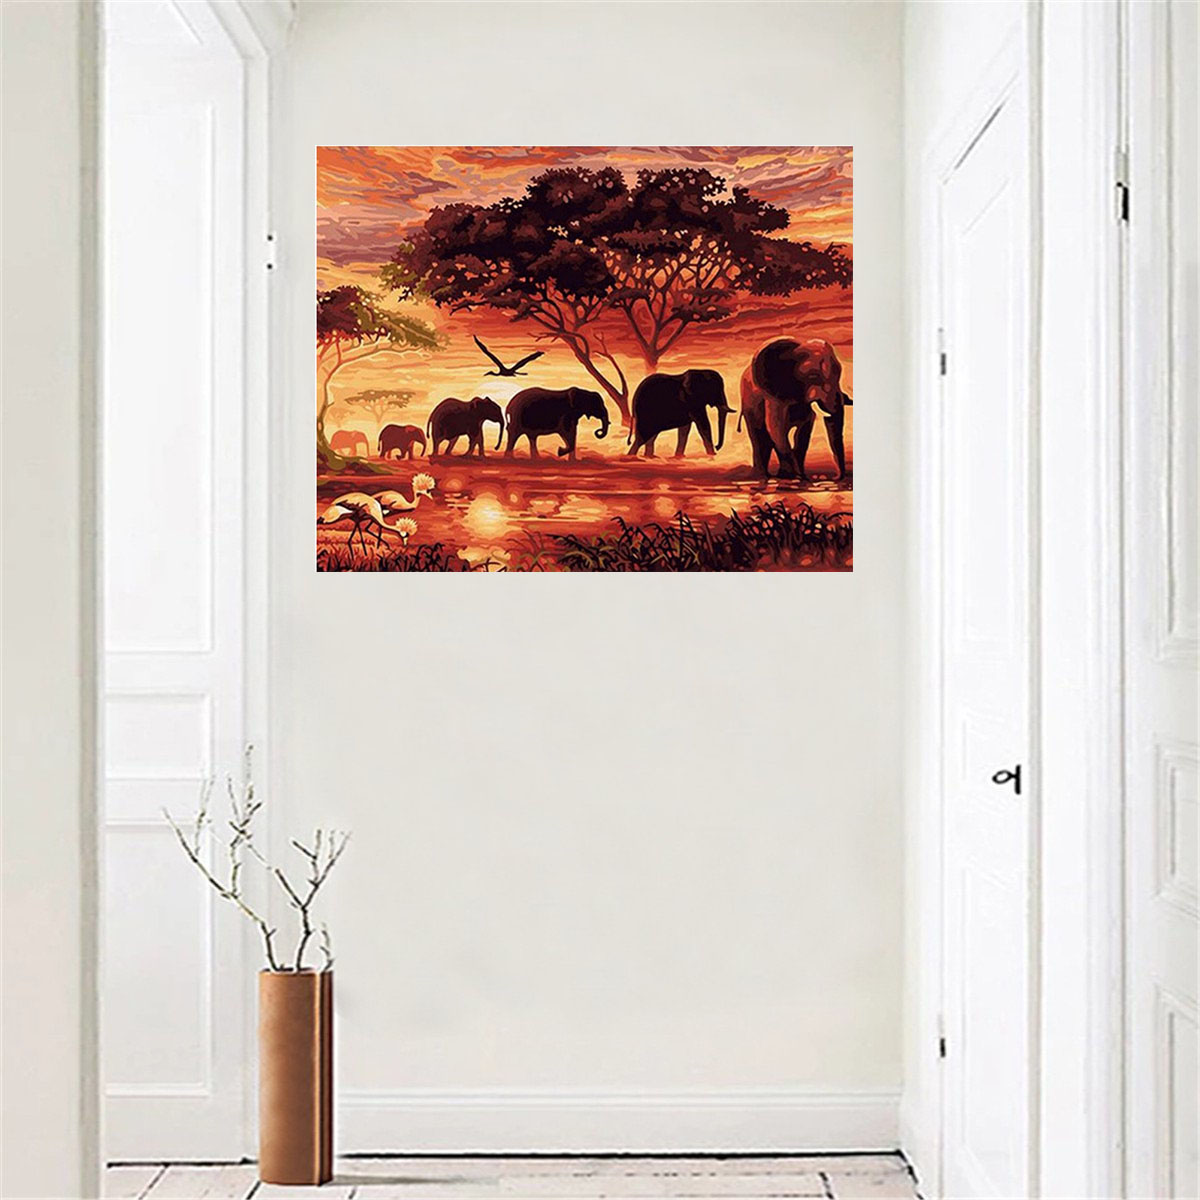 DIY-Diamond-Painting-Elephant-Scenery-Wall-Painting-Hanging-Pictures-Handmade-Wall-Decorations-Gifts-1744020-9